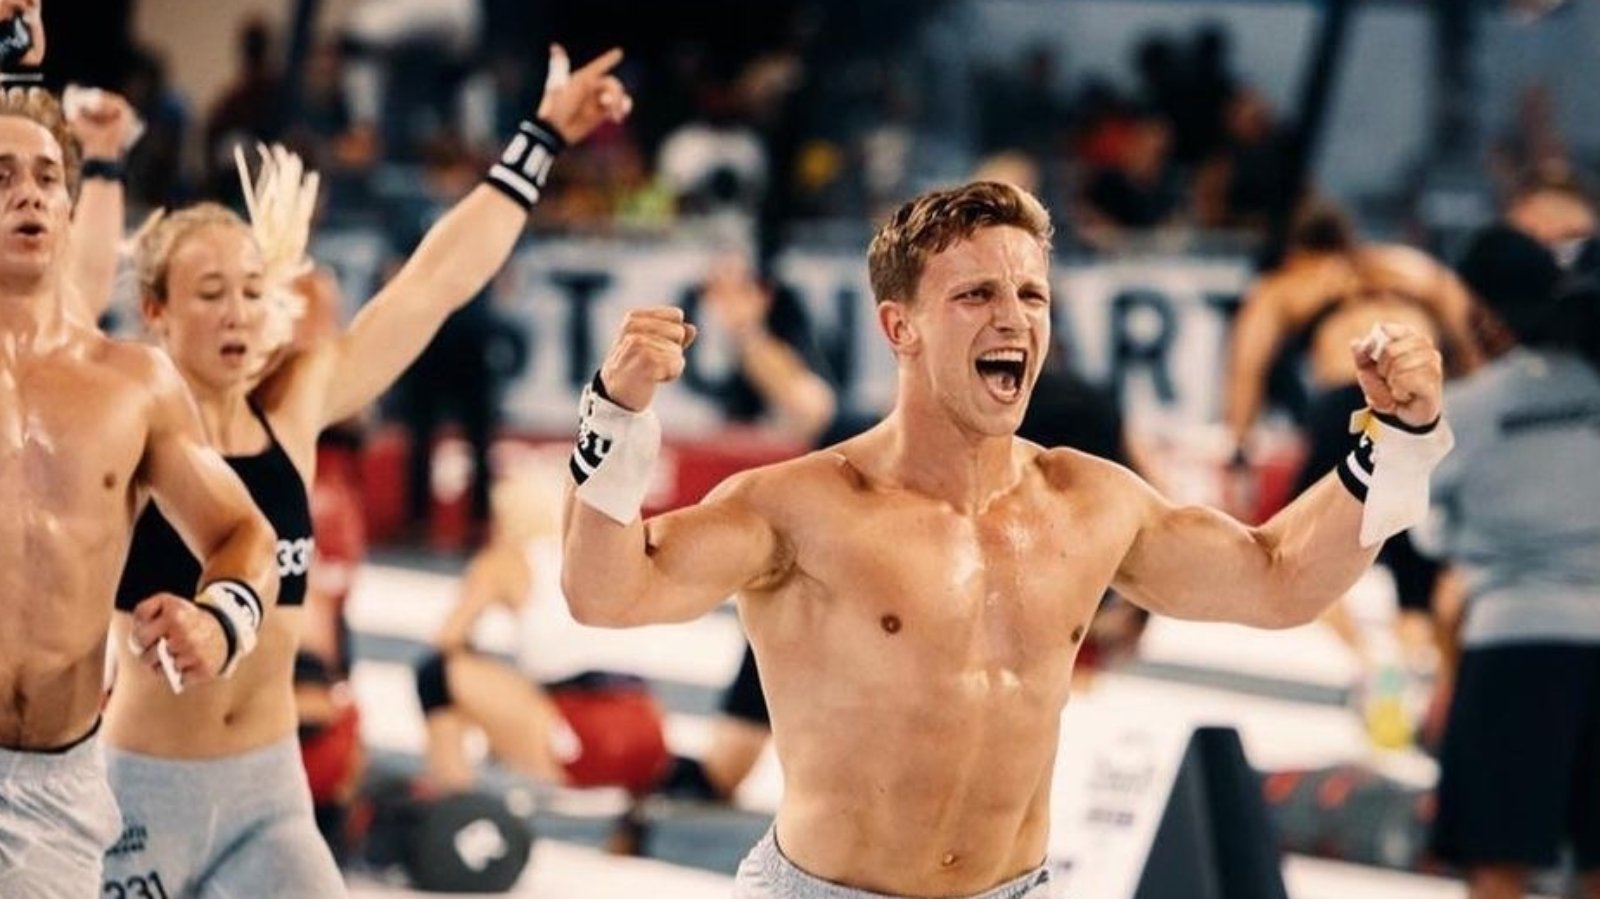 Vegan CrossFit Stars Crowned ‘Fourth Fittest Team In The World’